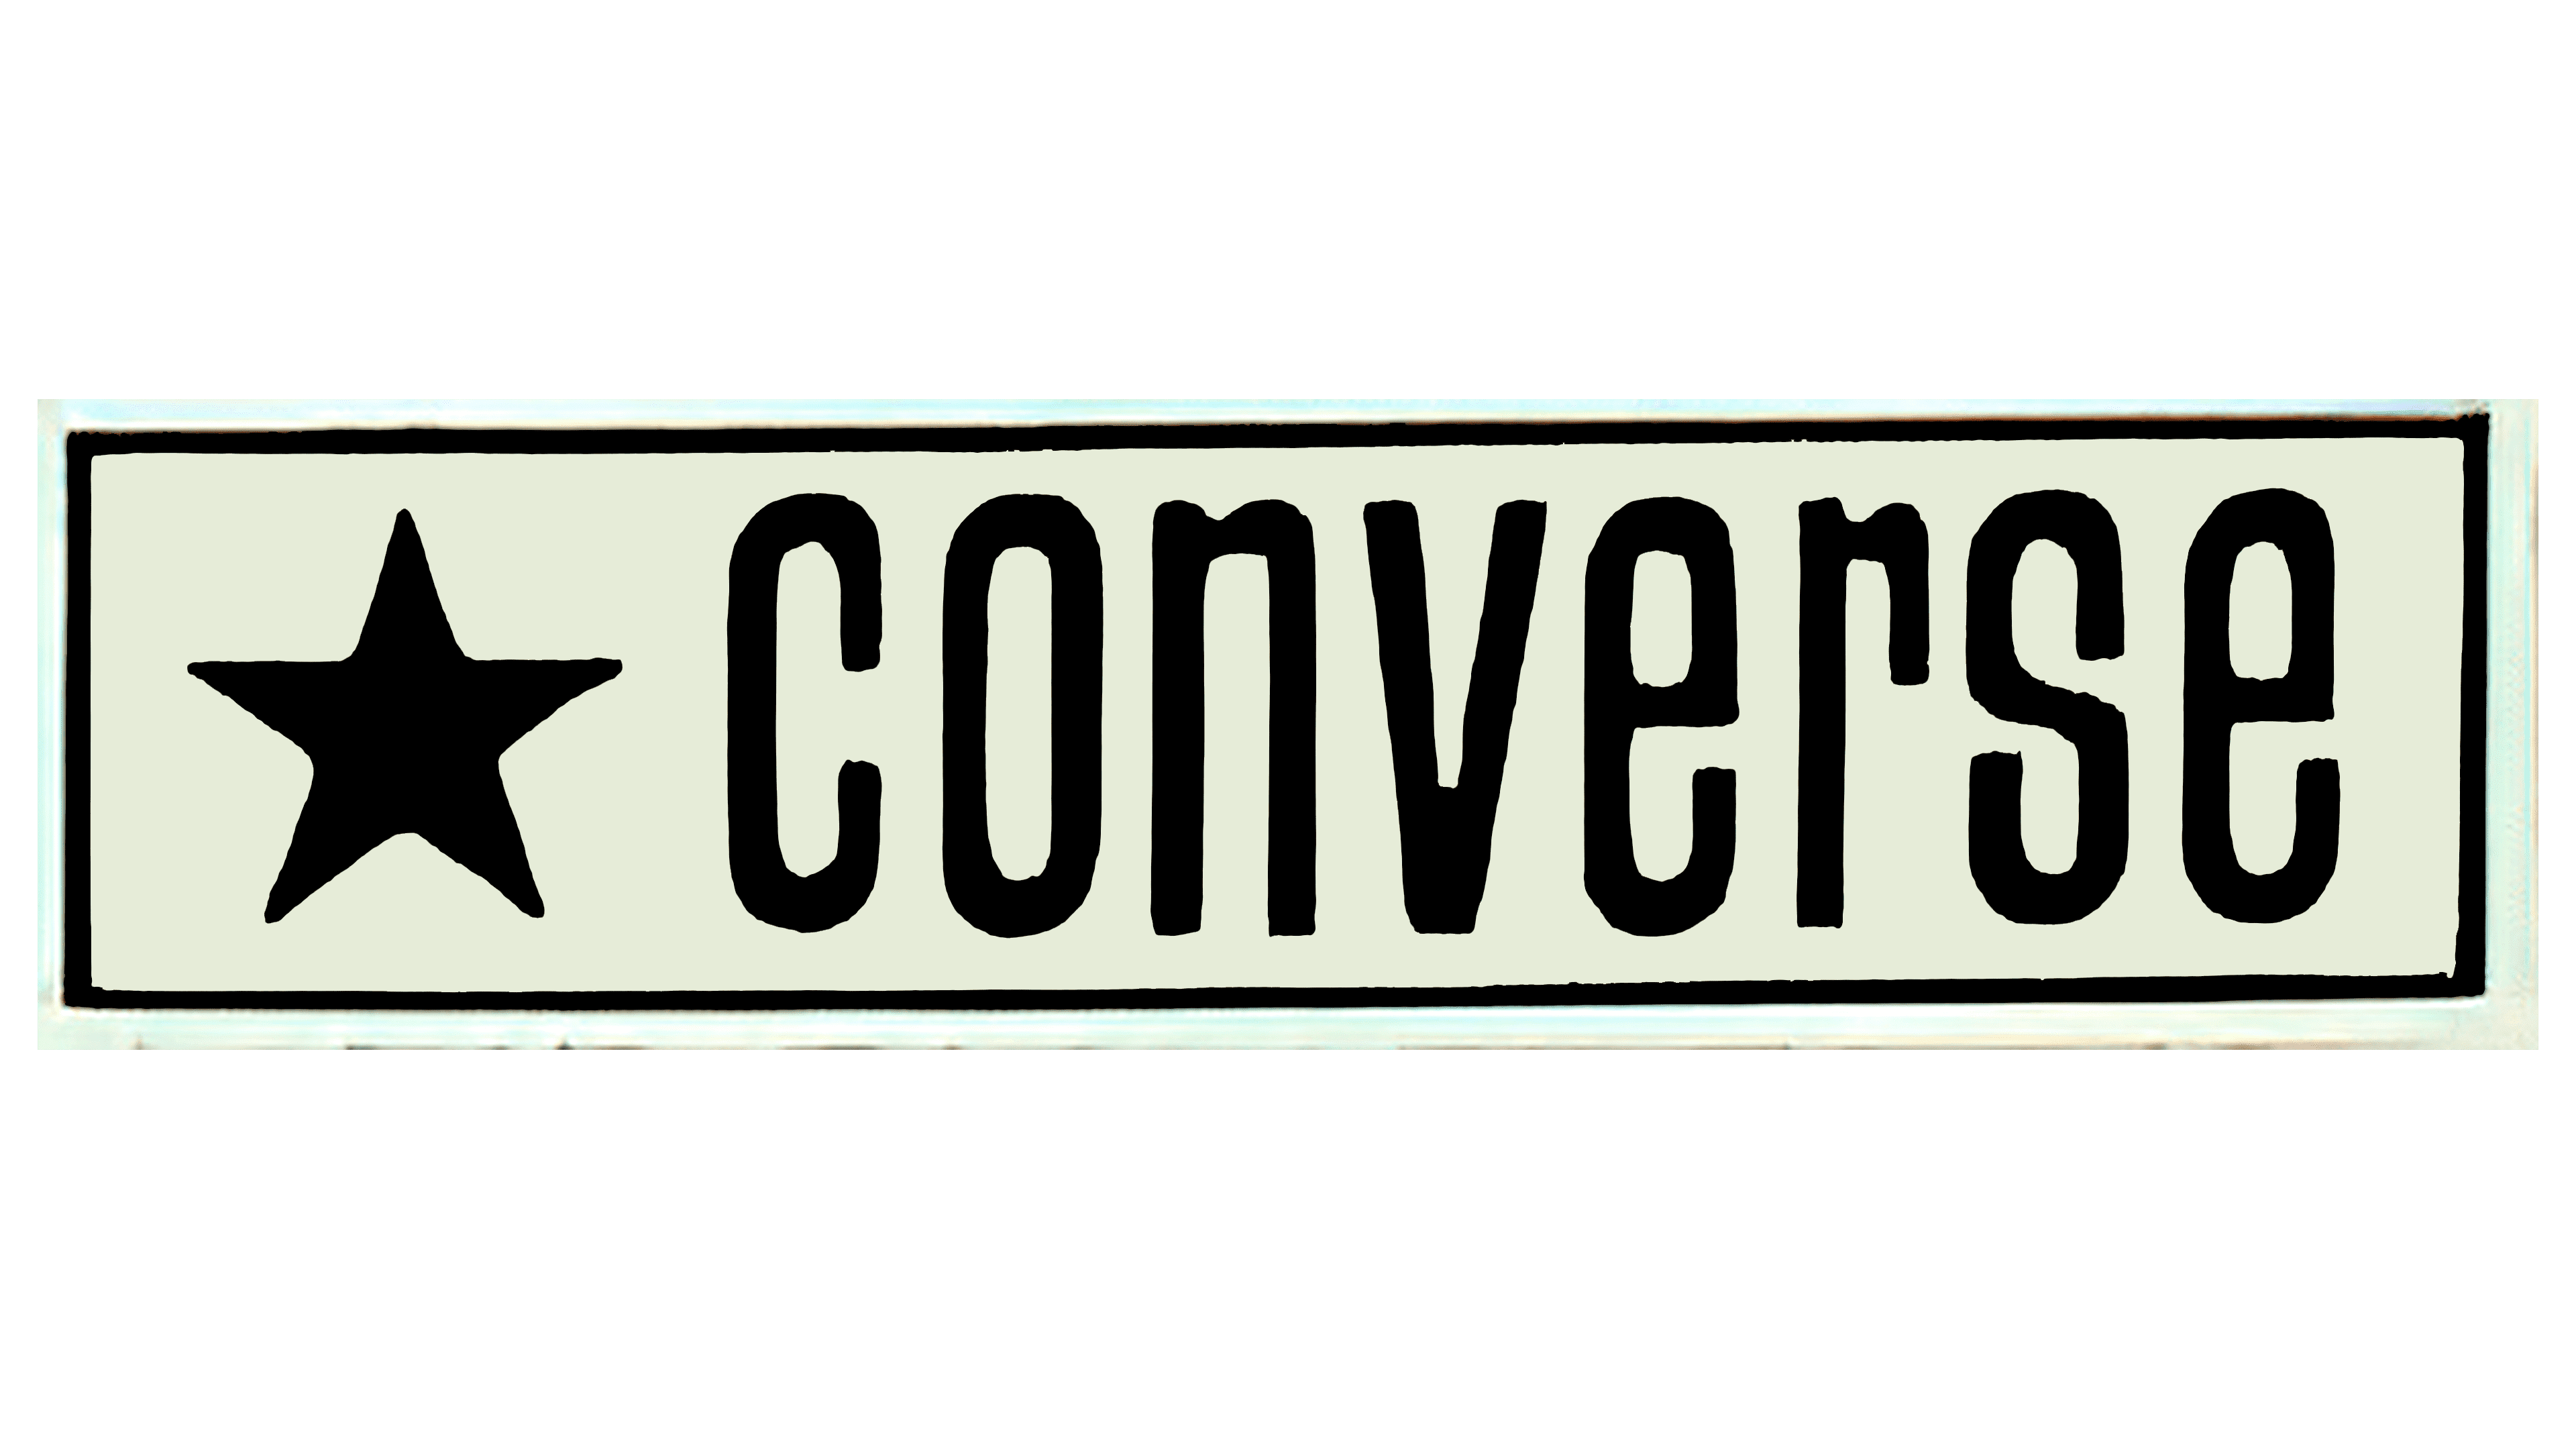 converse brand logo meaning